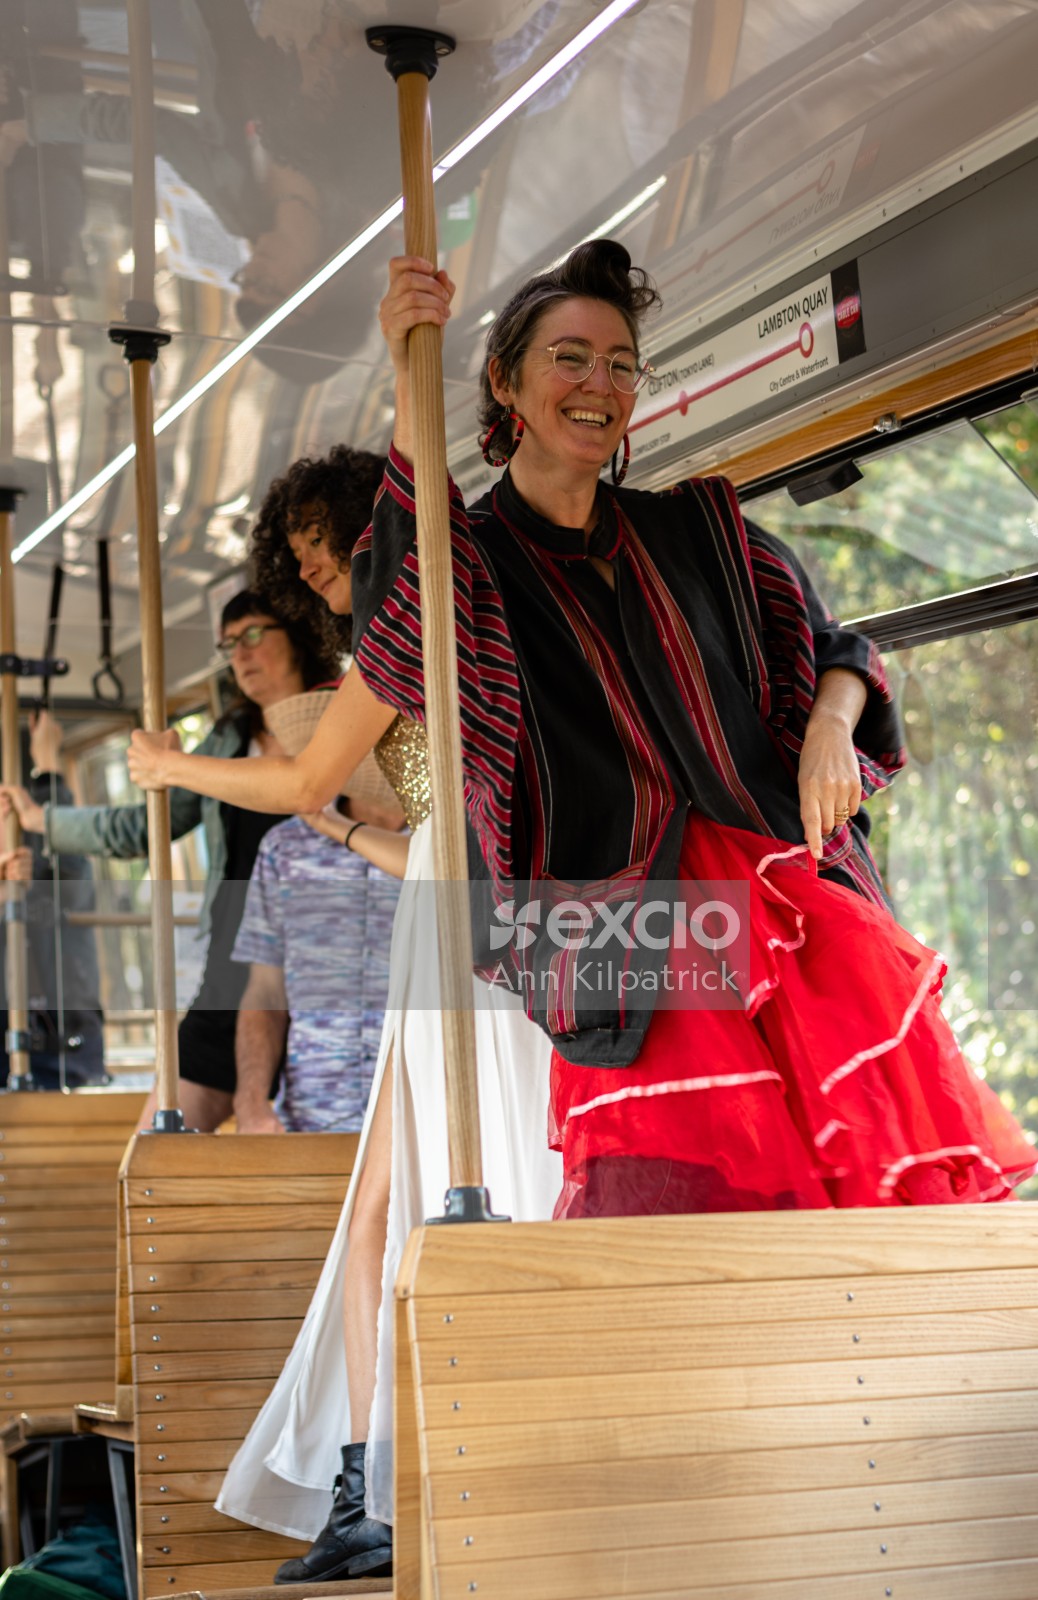 Lady in red dancing on cable car